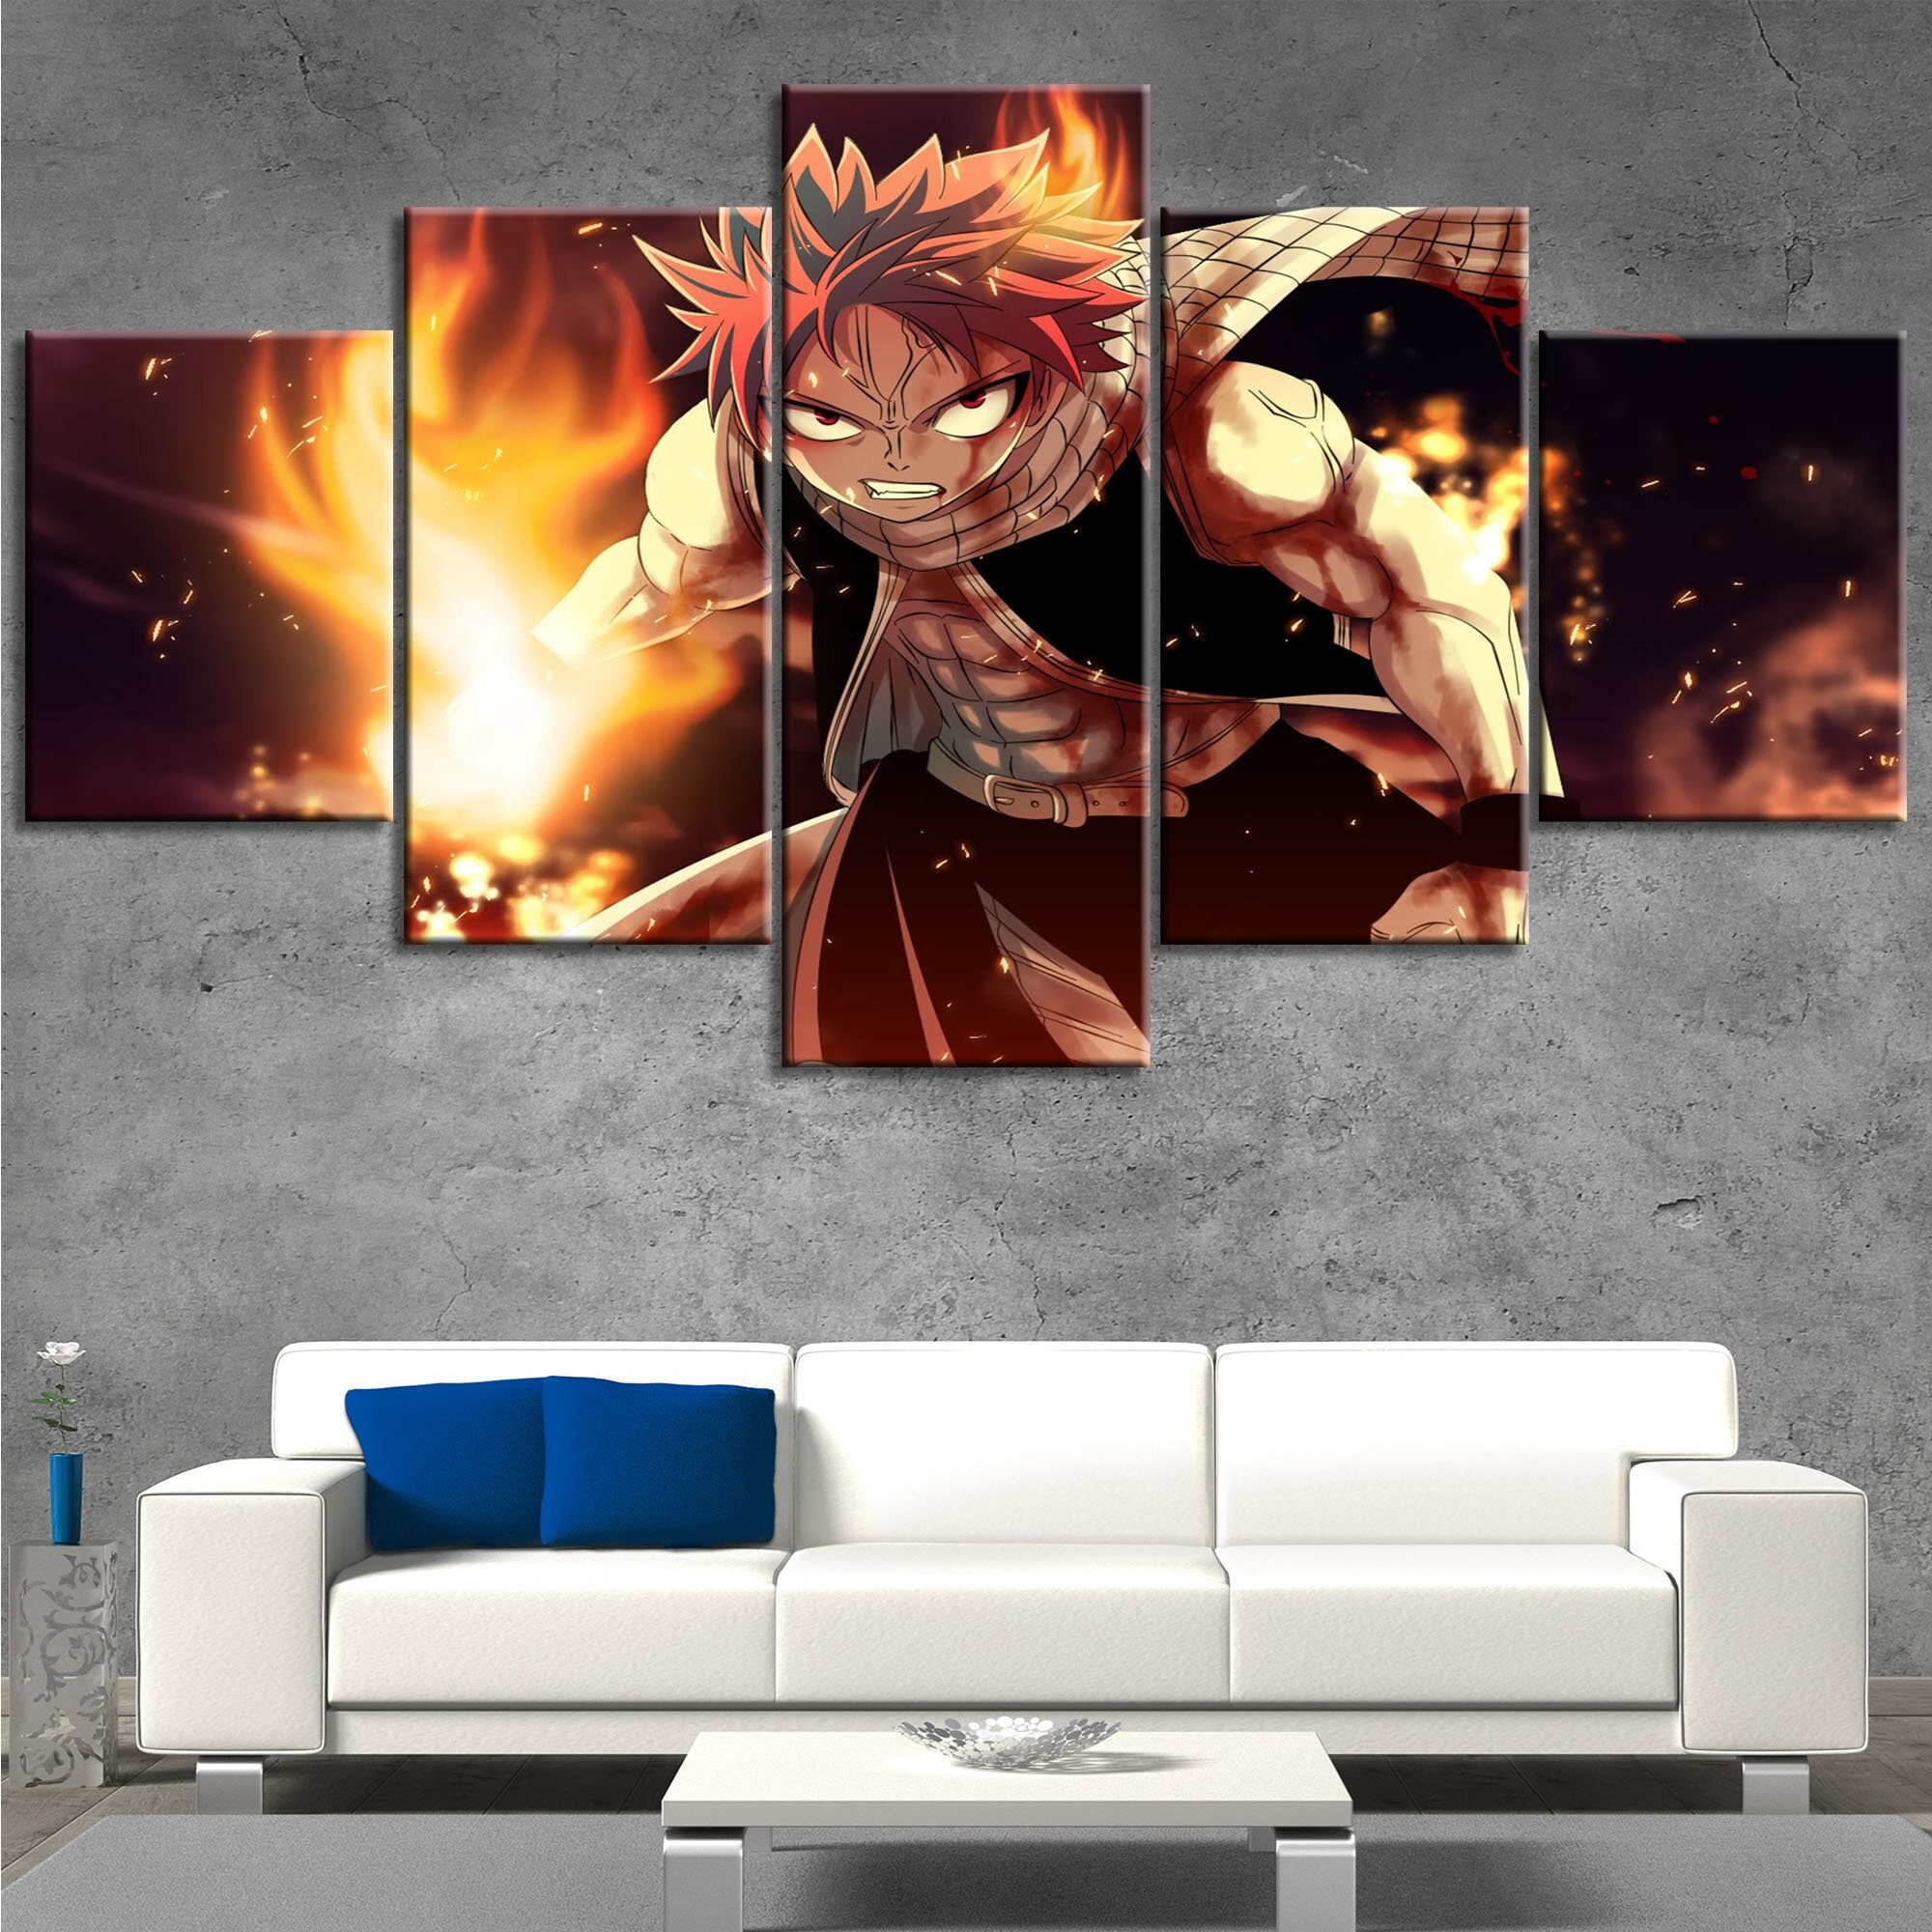 Japanese Anime FAIRY TAIL Poster Natsu Dragneel and Lucy Painting Wall Art  Home Decoration Bar Kawaii